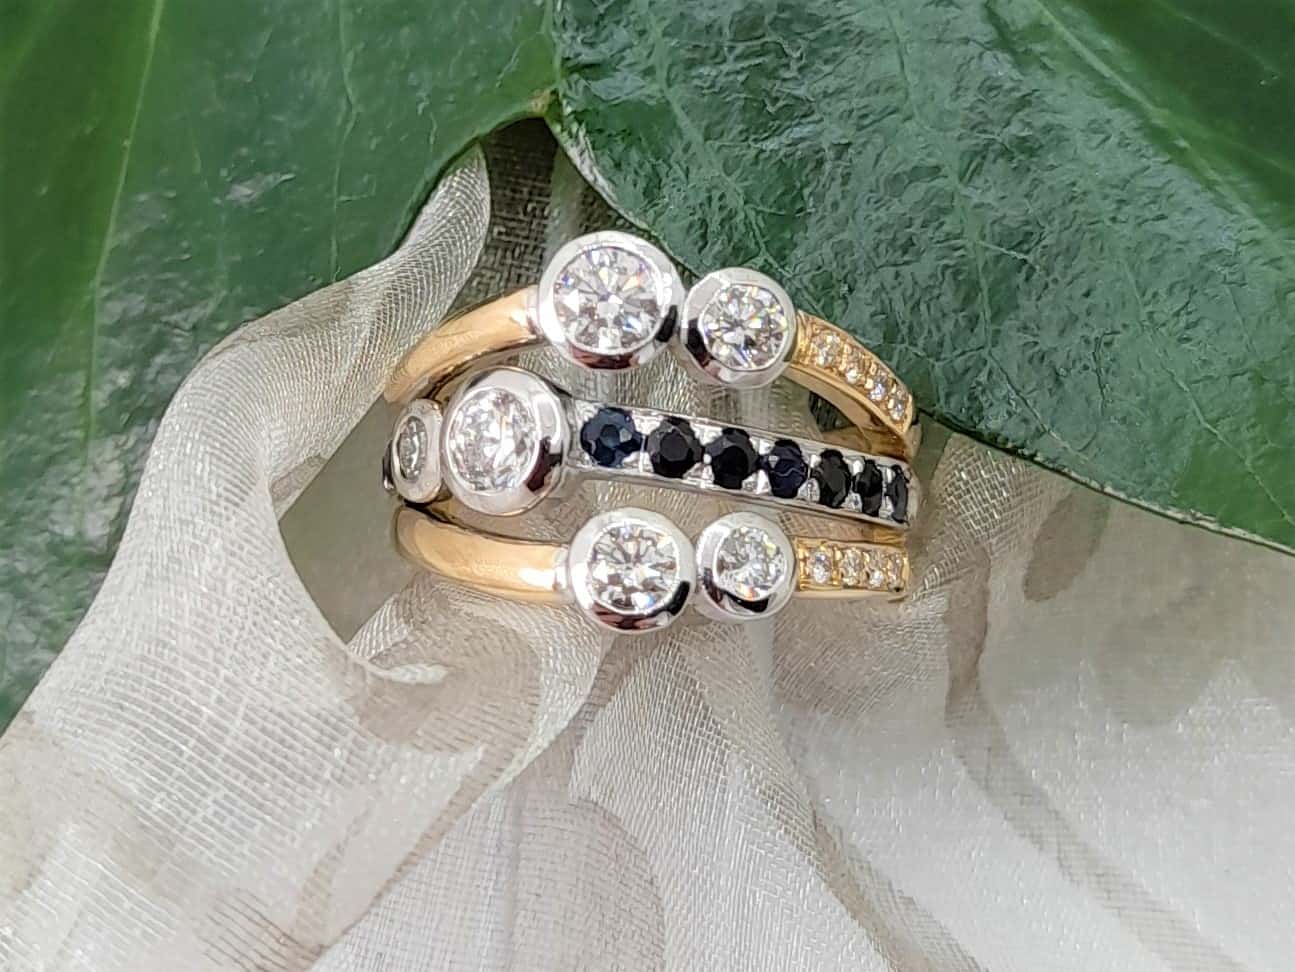 Paige one of our Bespoke Sapphire Diamond Rings,   Custom made in 18ct Yellow and White Gold as an Engagement Ring & Wedding Ring all in one. Sapphires and two larger diamonds were client's own from existing pendant with additional brilliant cut diamonds added to complete the design.